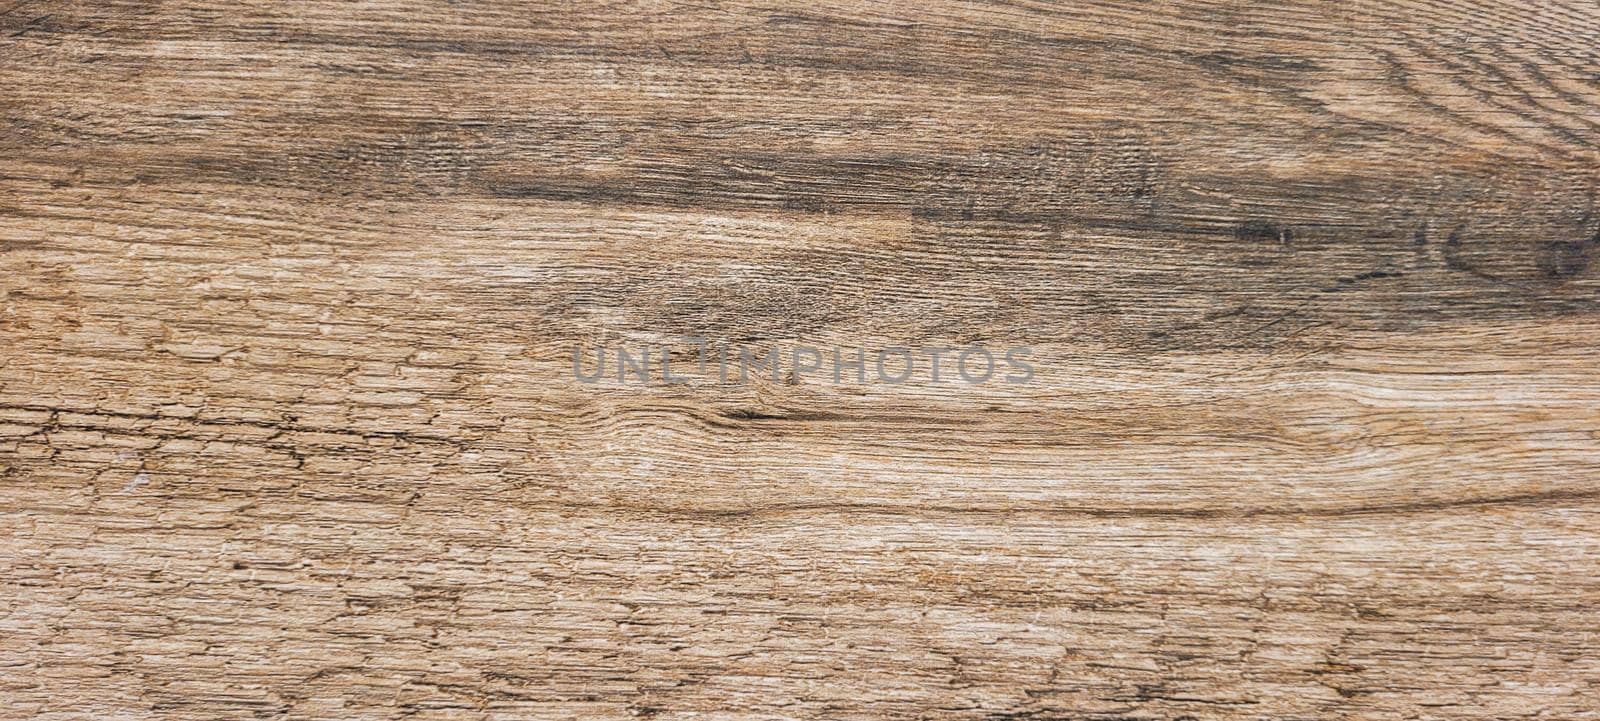 light rustic wood that can be used as a background by sarsa